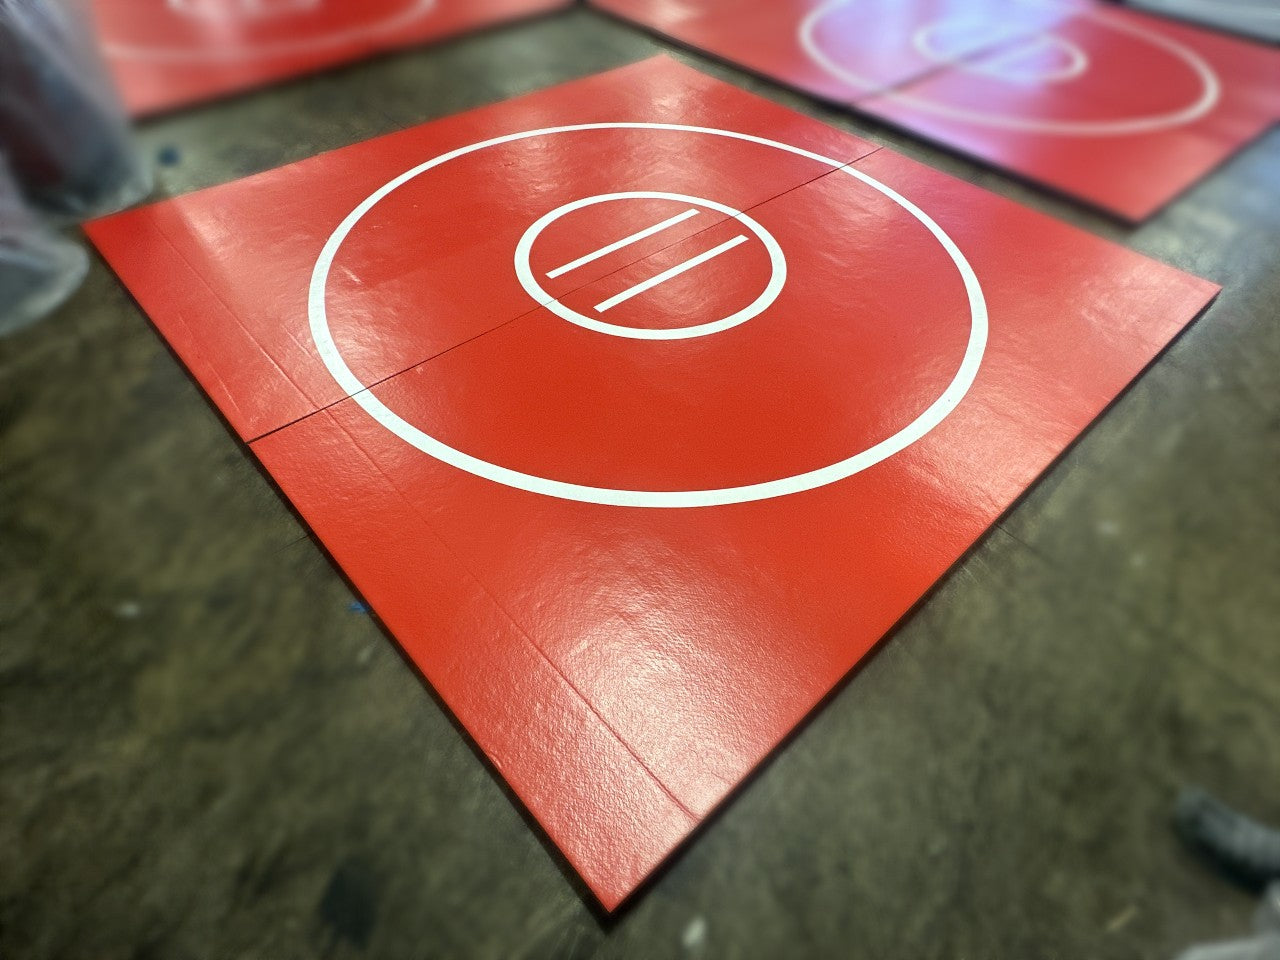 Clearance Wrestling Mat 12' x 12' x 1 3/8" Roll-Up Mat Red with White Circles